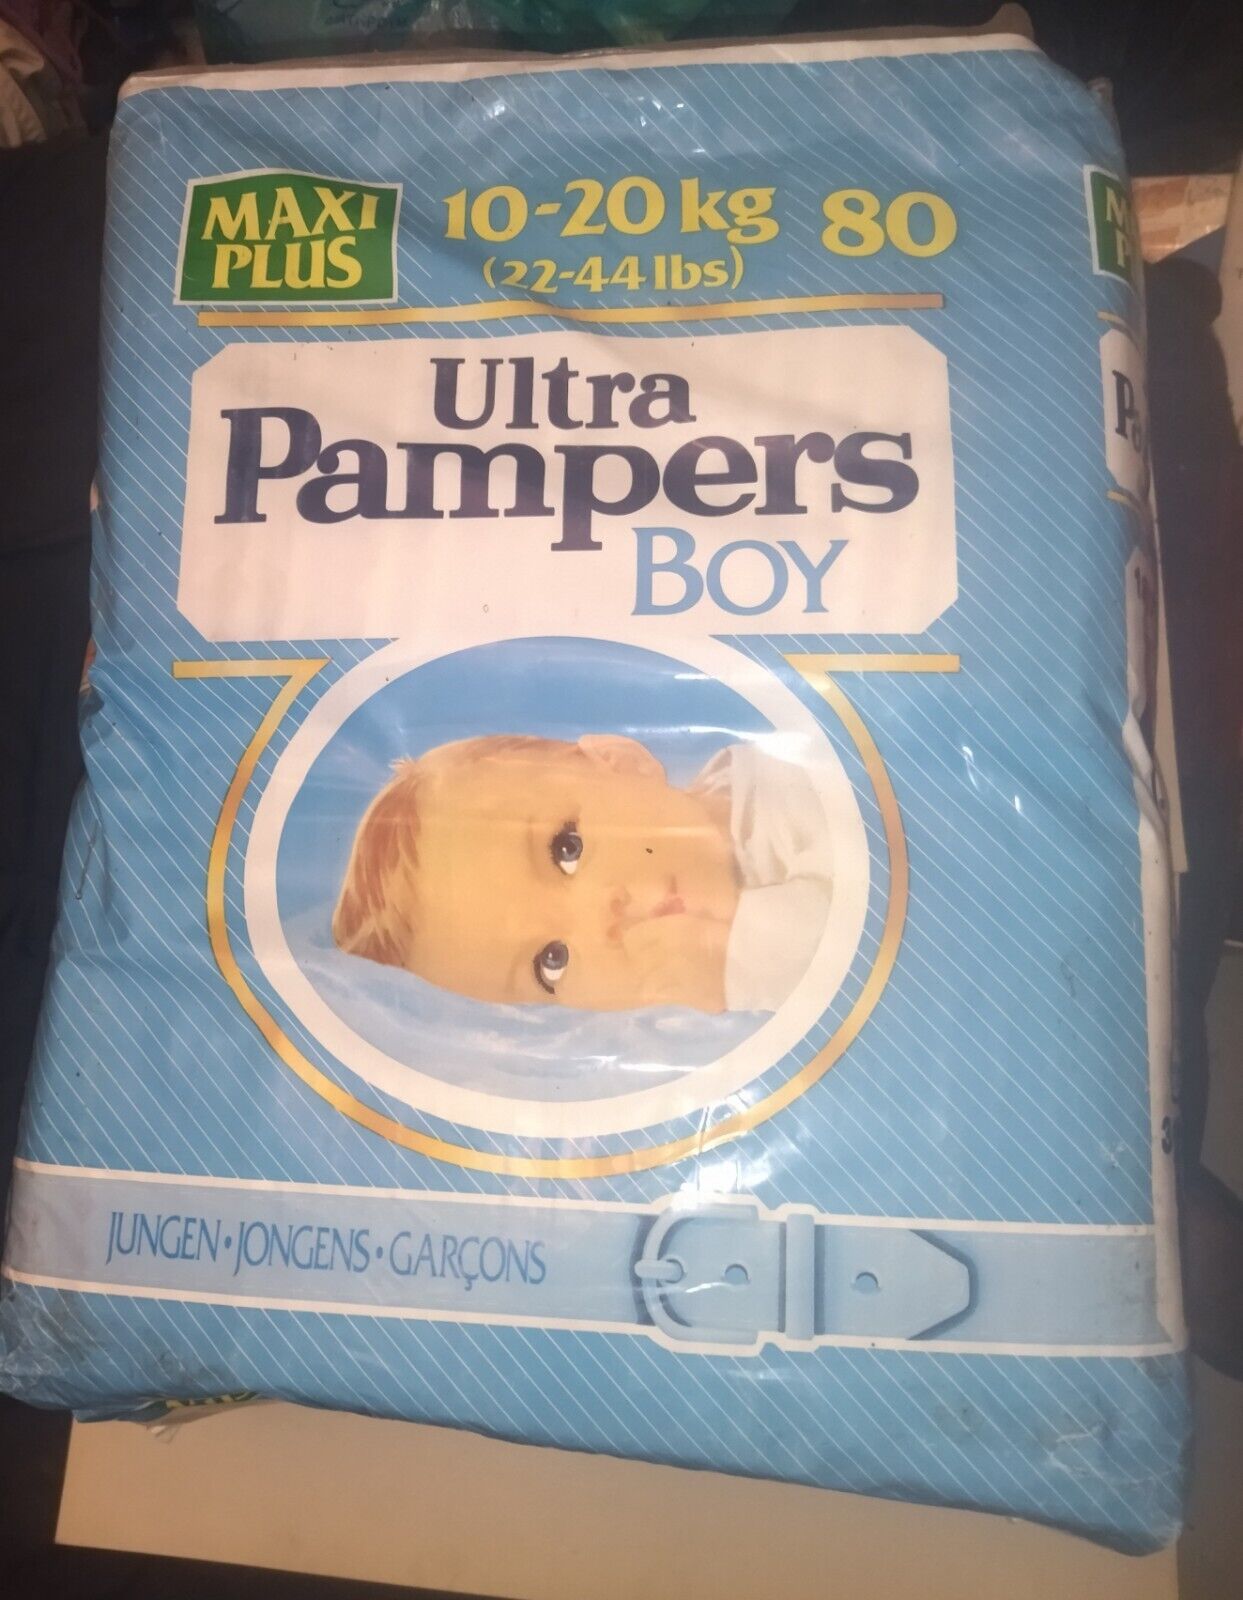 pampers procare 0 38 zt